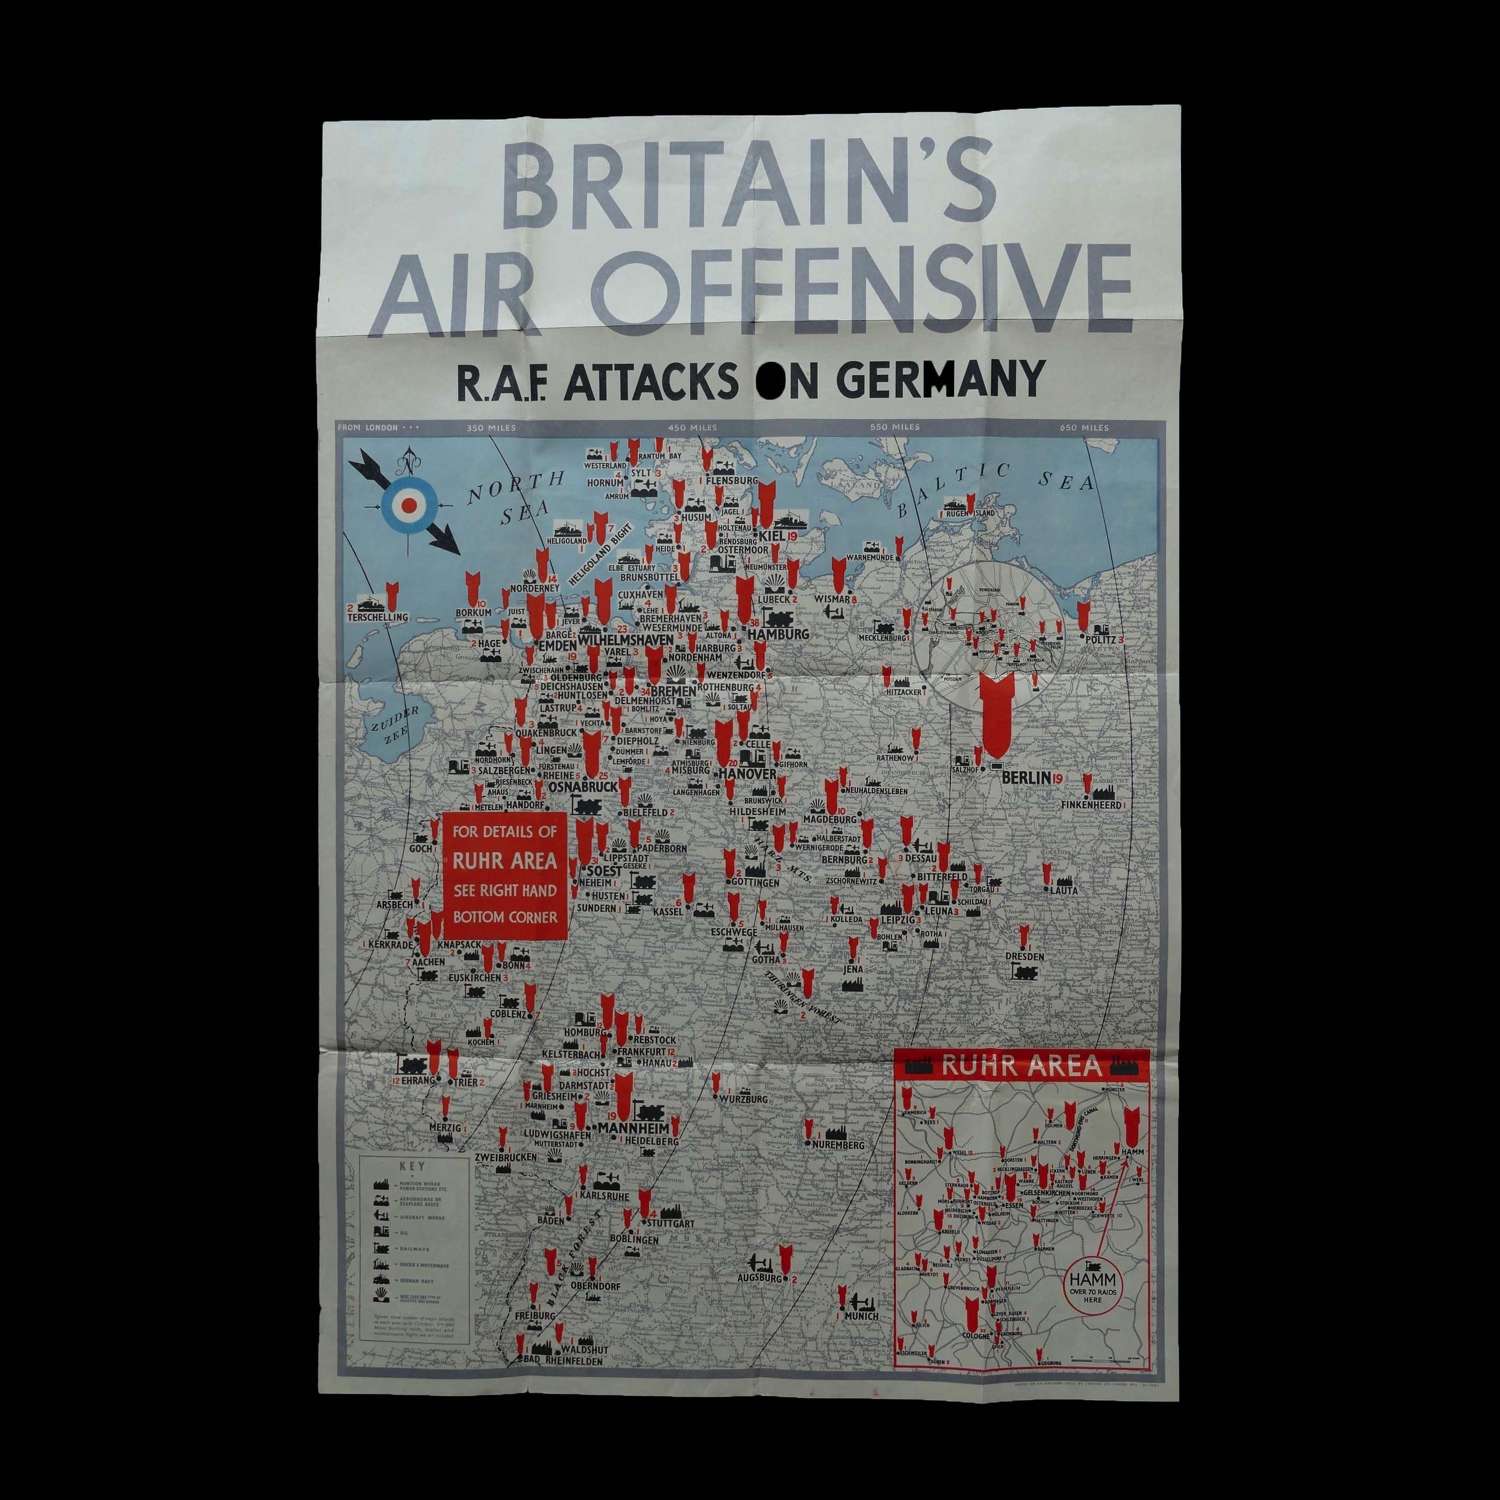 Britain's Air Offensive poster - RAF Attacks On Germany